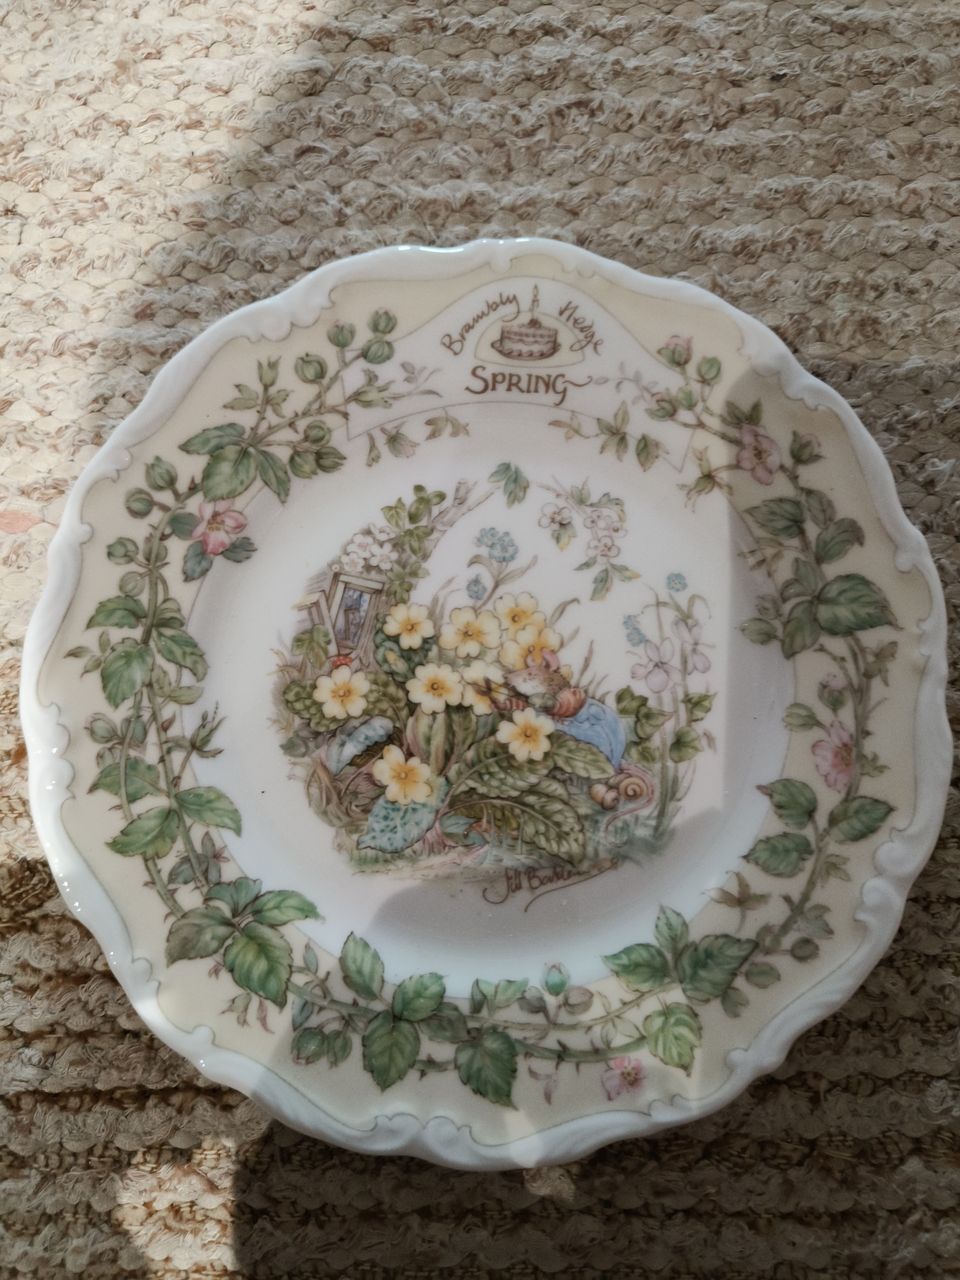 Royal Doulton Spring - The Afternoon Tea plate